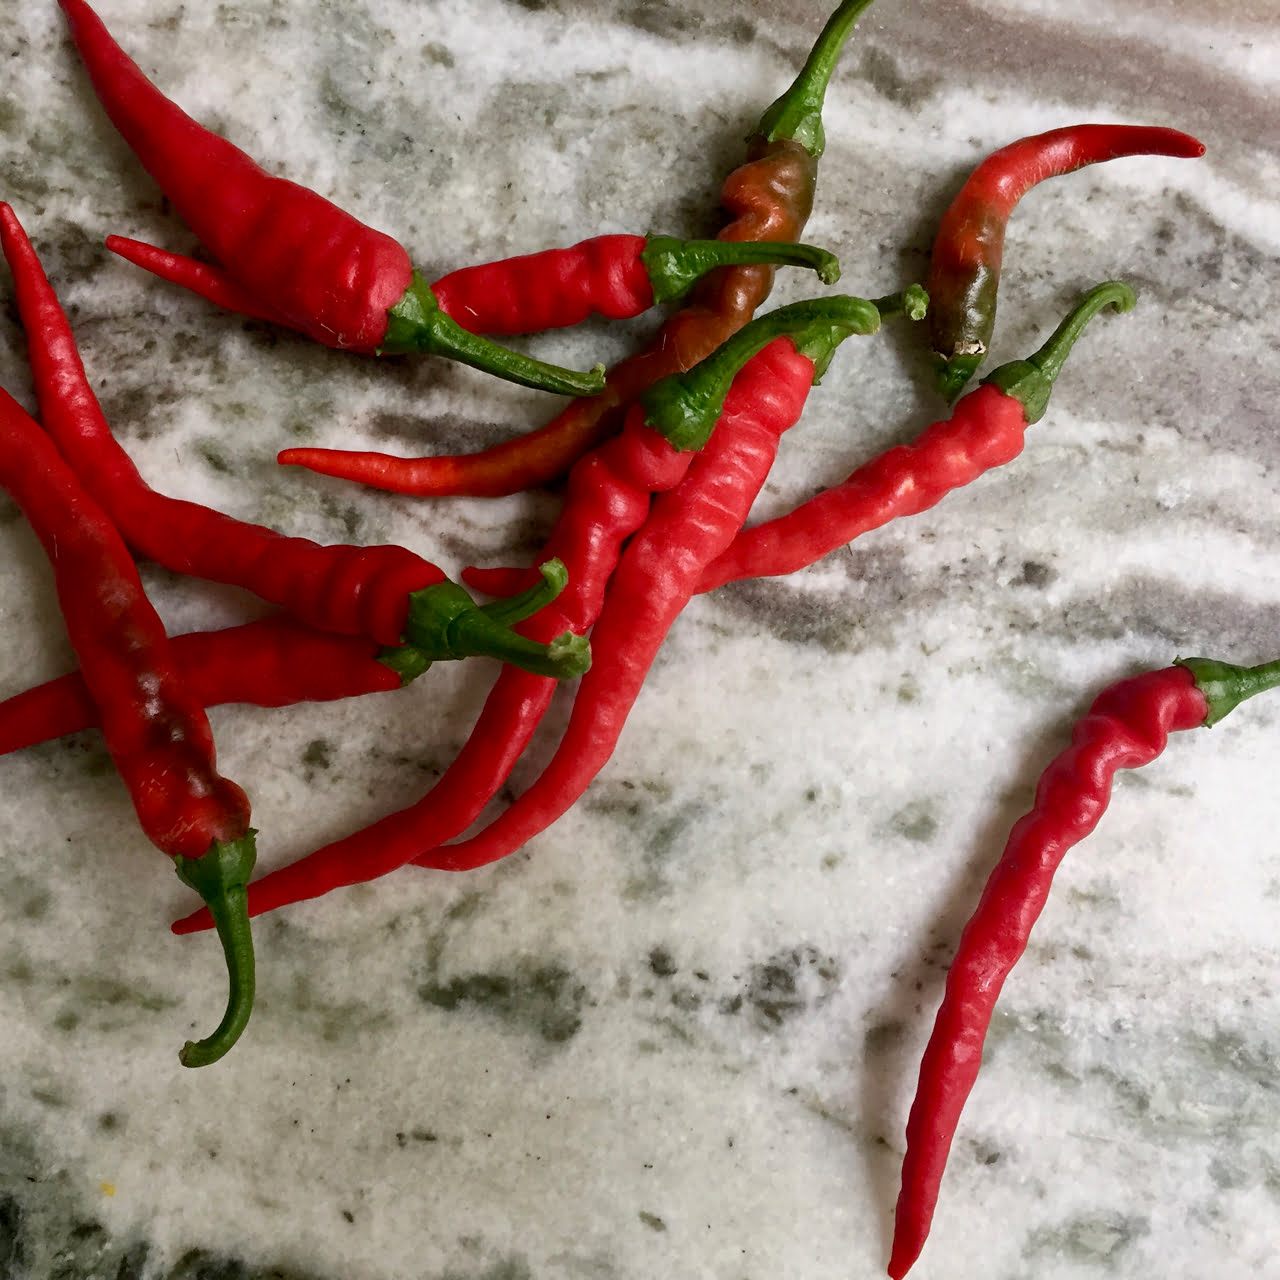 Chili Peppers For Winter Wellness